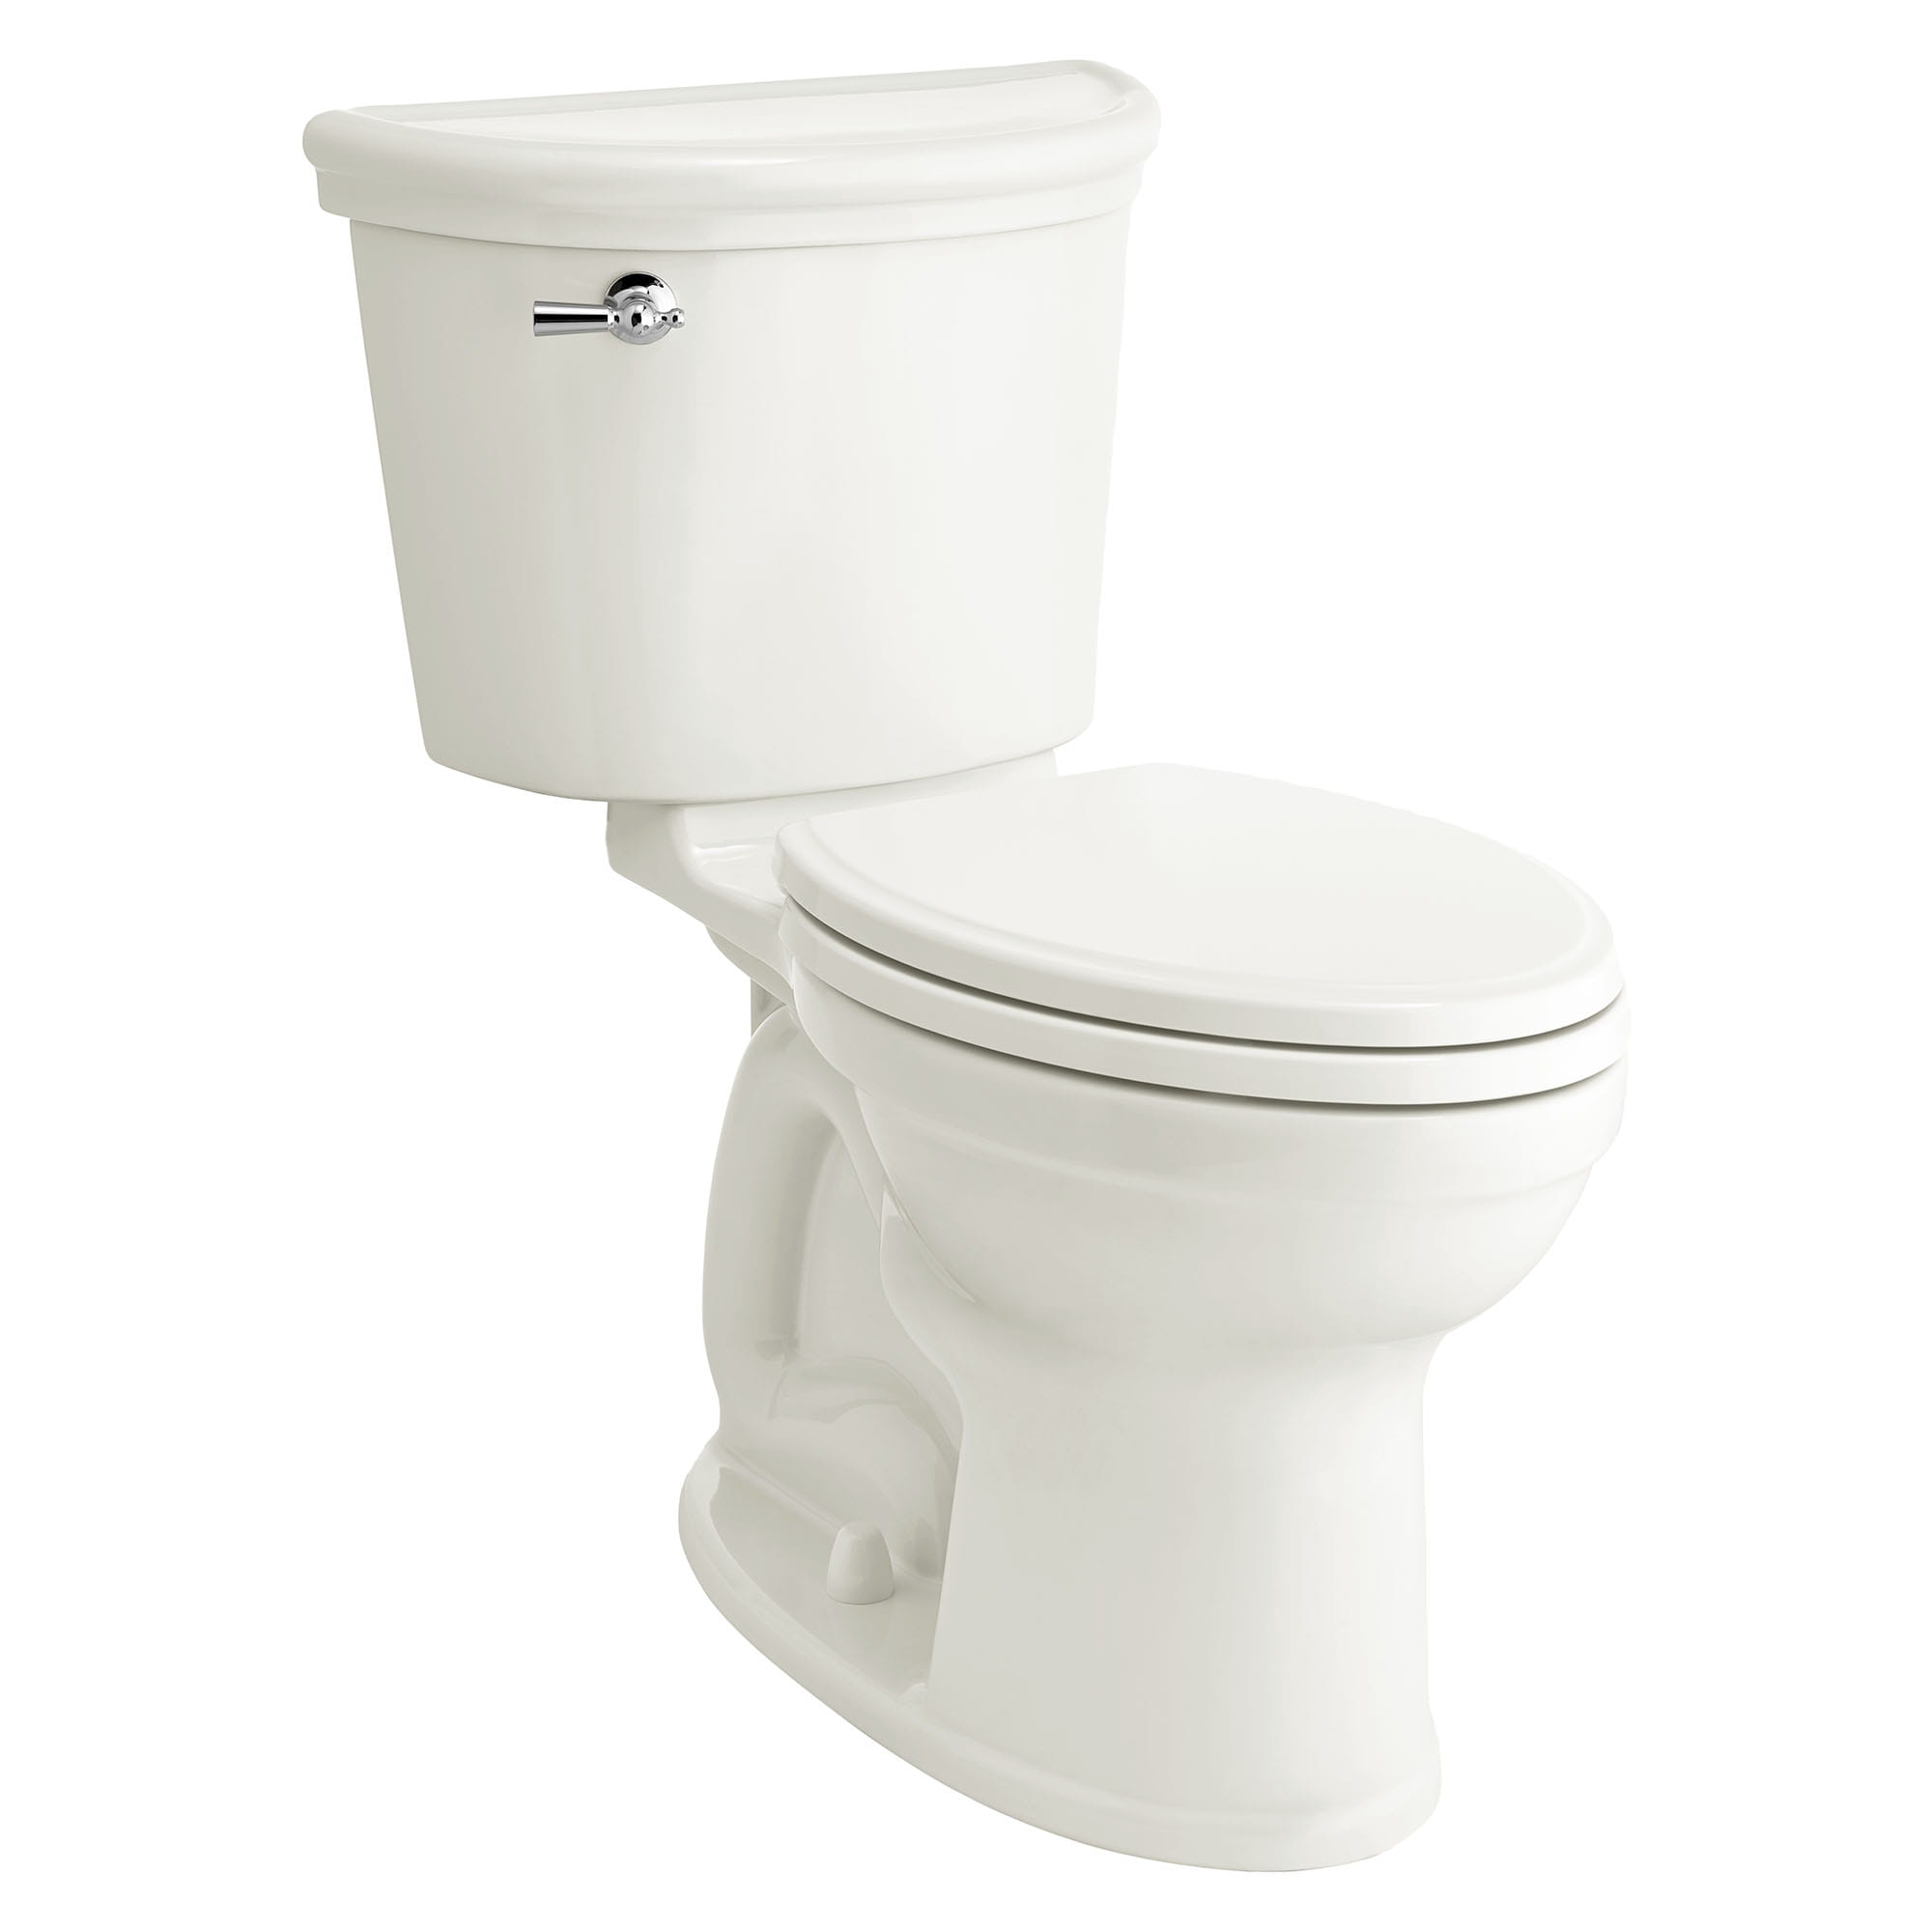 Retrospect Champion PRO Two Piece 128 gpf 48 Lpf Chair Height Elongated Toilet less Seat WHITE